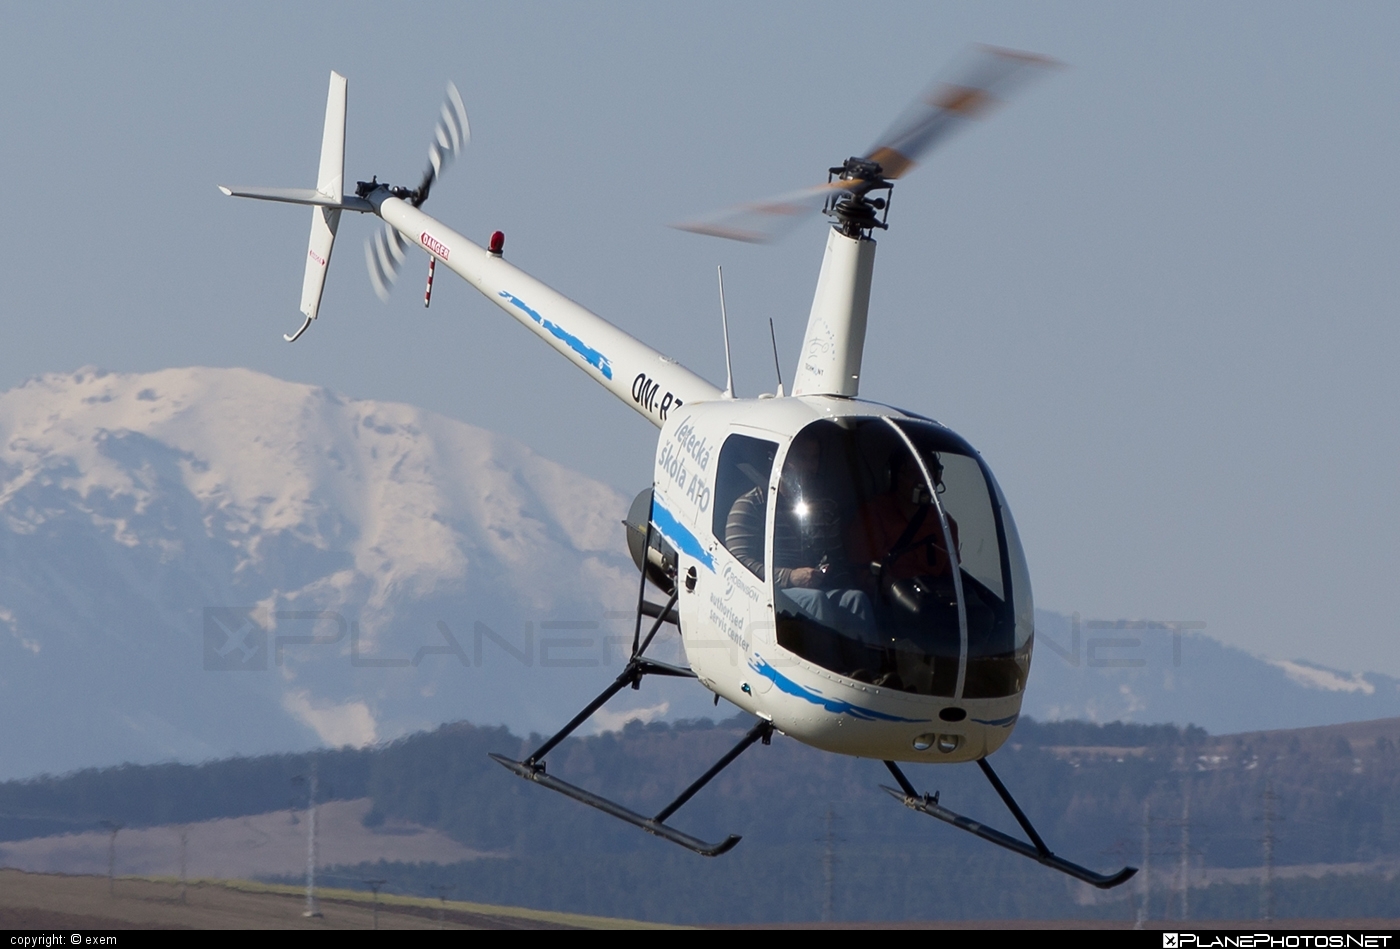 Robinson R22 Beta - OM-RZZ operated by TECH-MONT Helicopter company #robinson